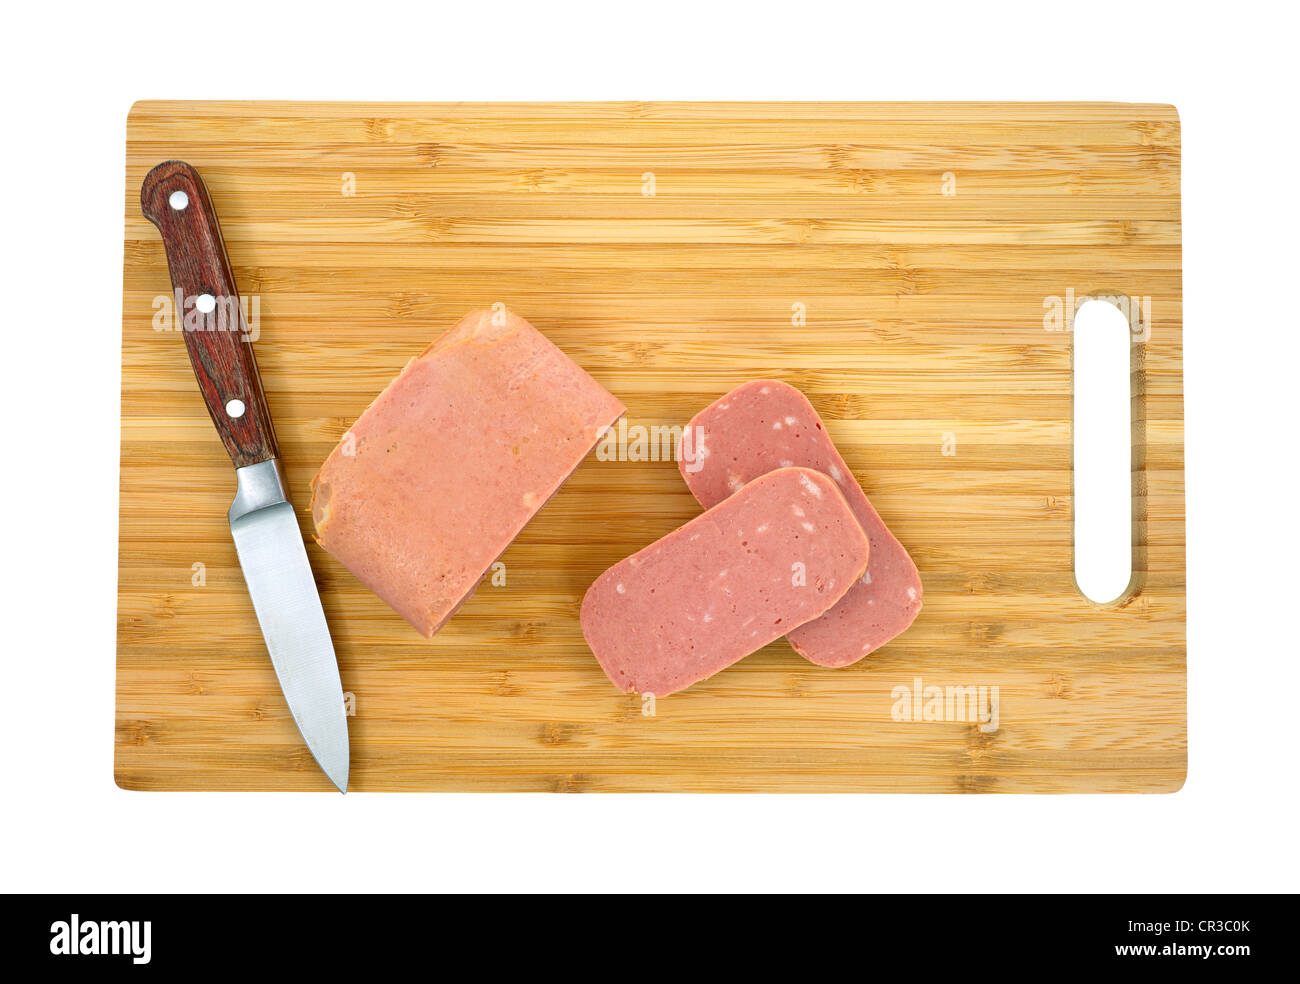 Luncheon meat sliced on cutting board Stock Photo